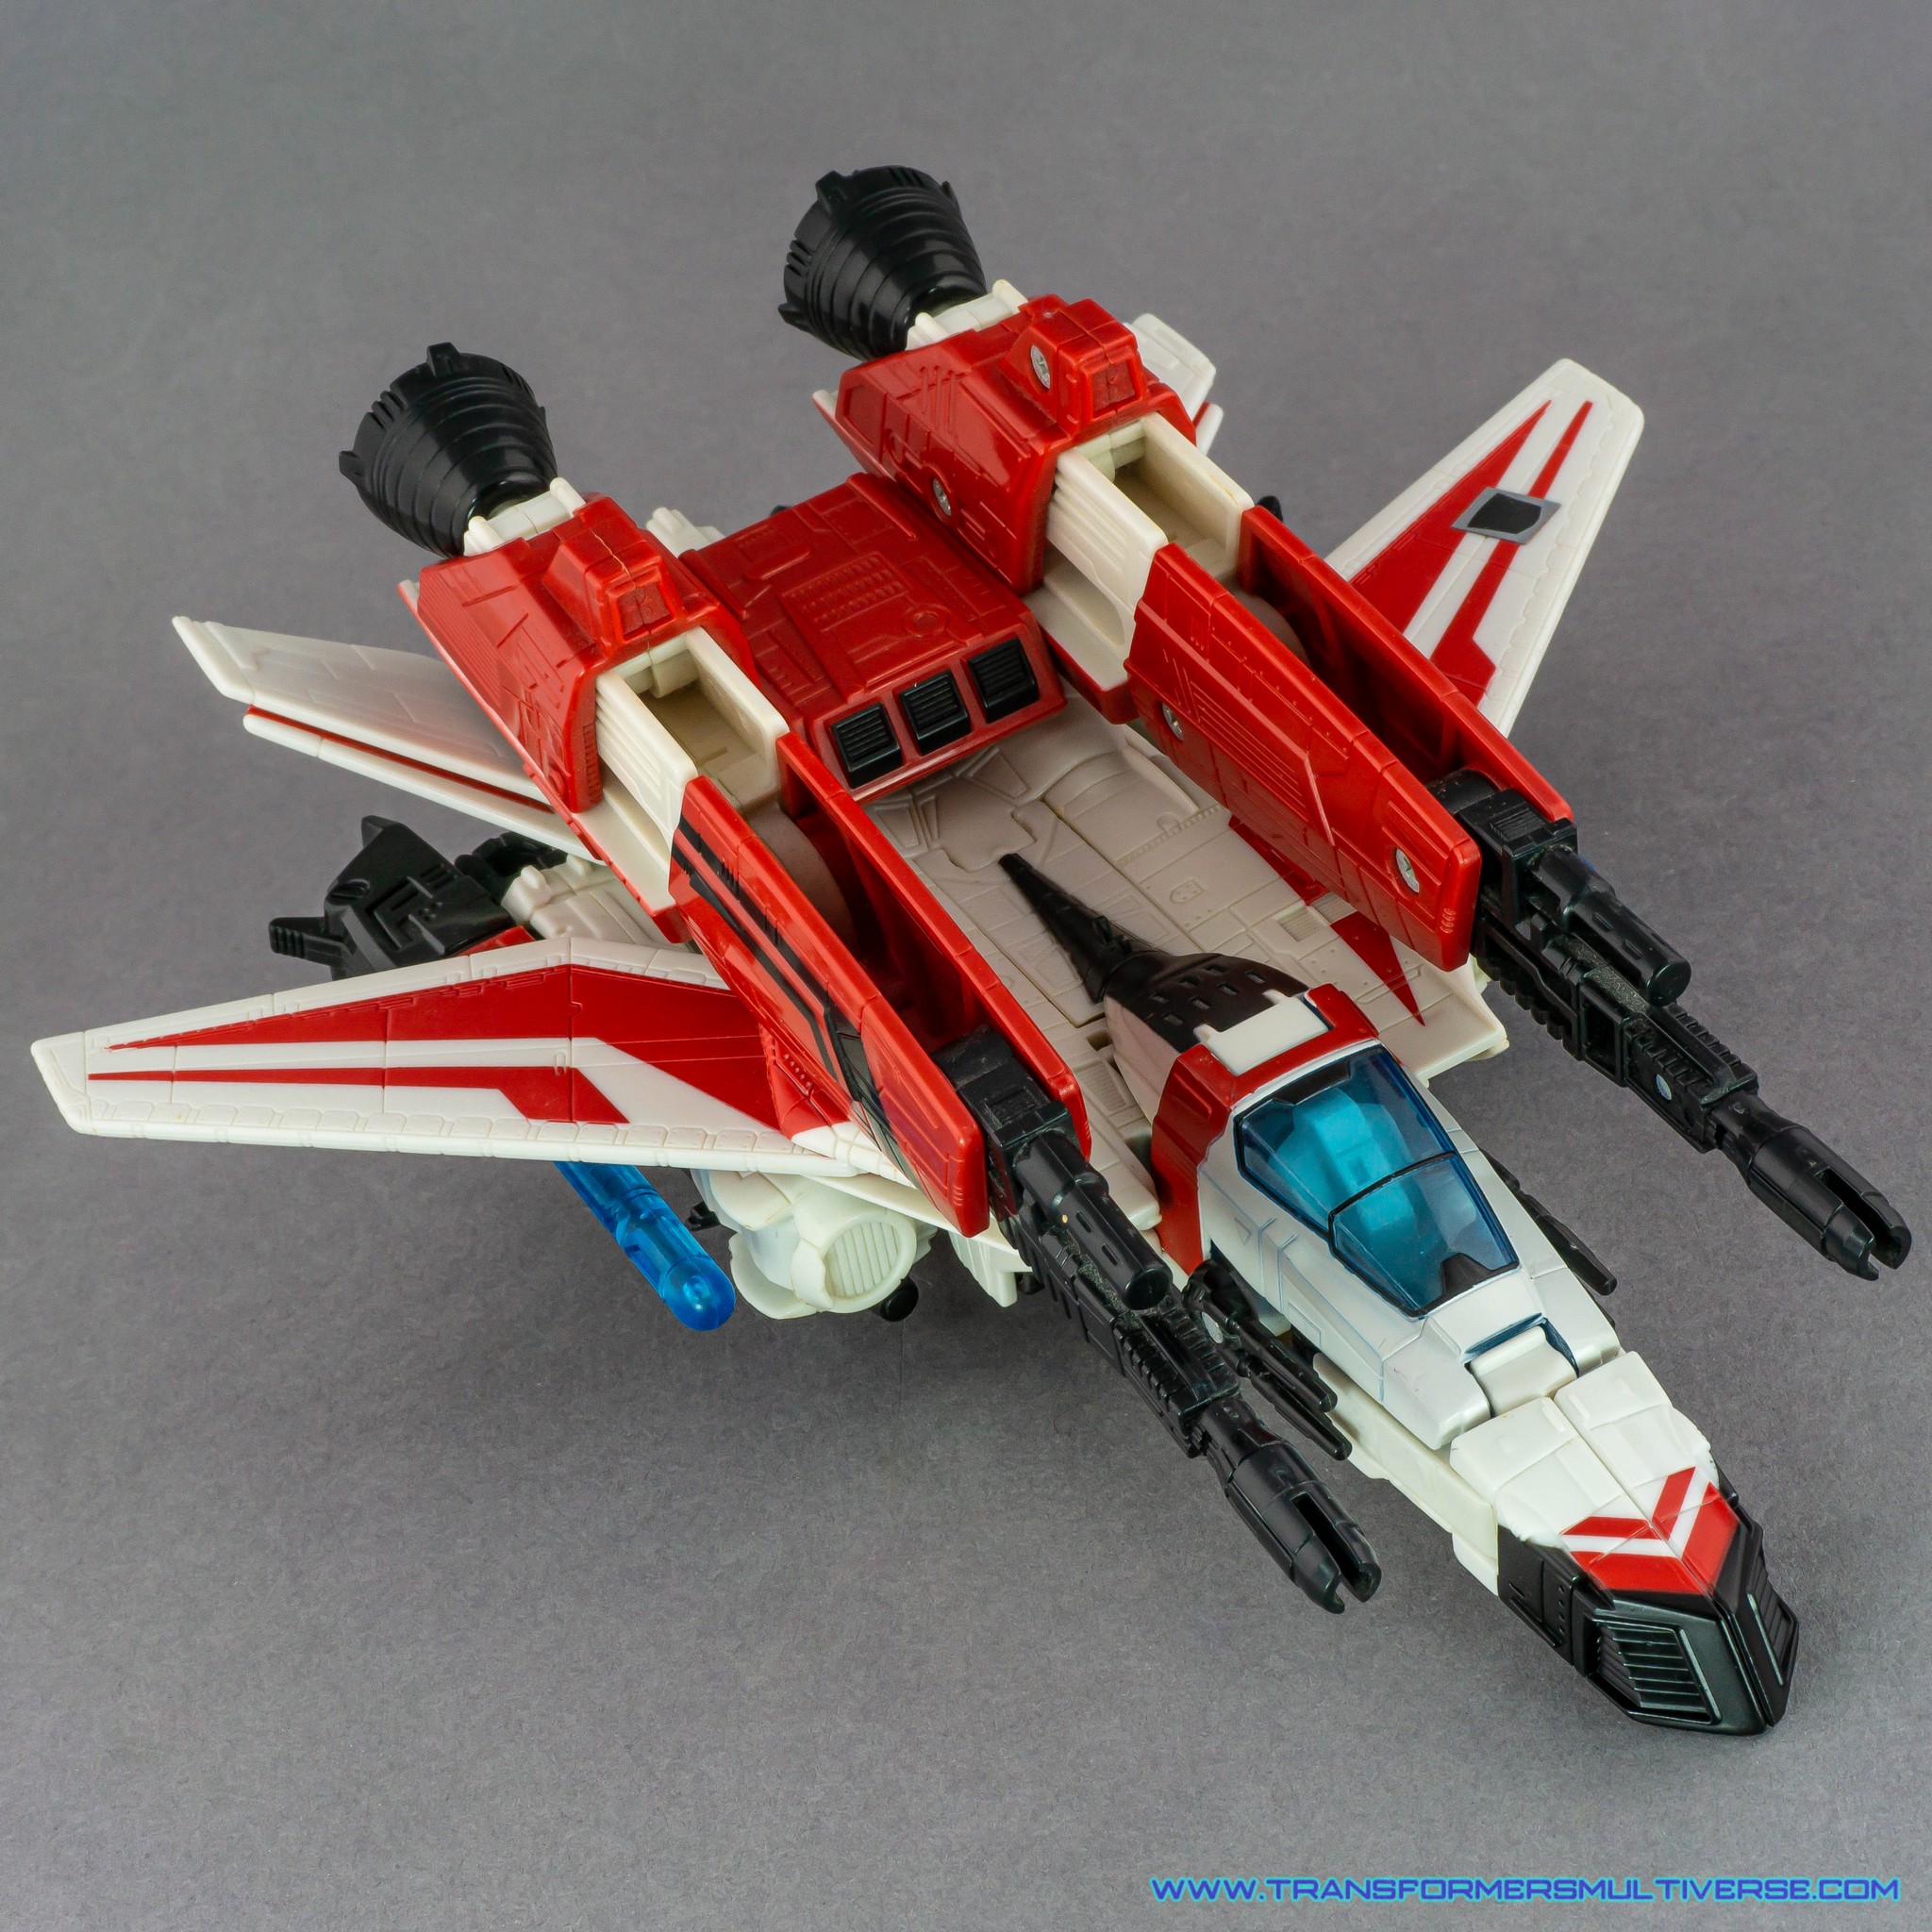 Transformers Classics Jetfire jet fighter mode with booster engines, weapons deployed